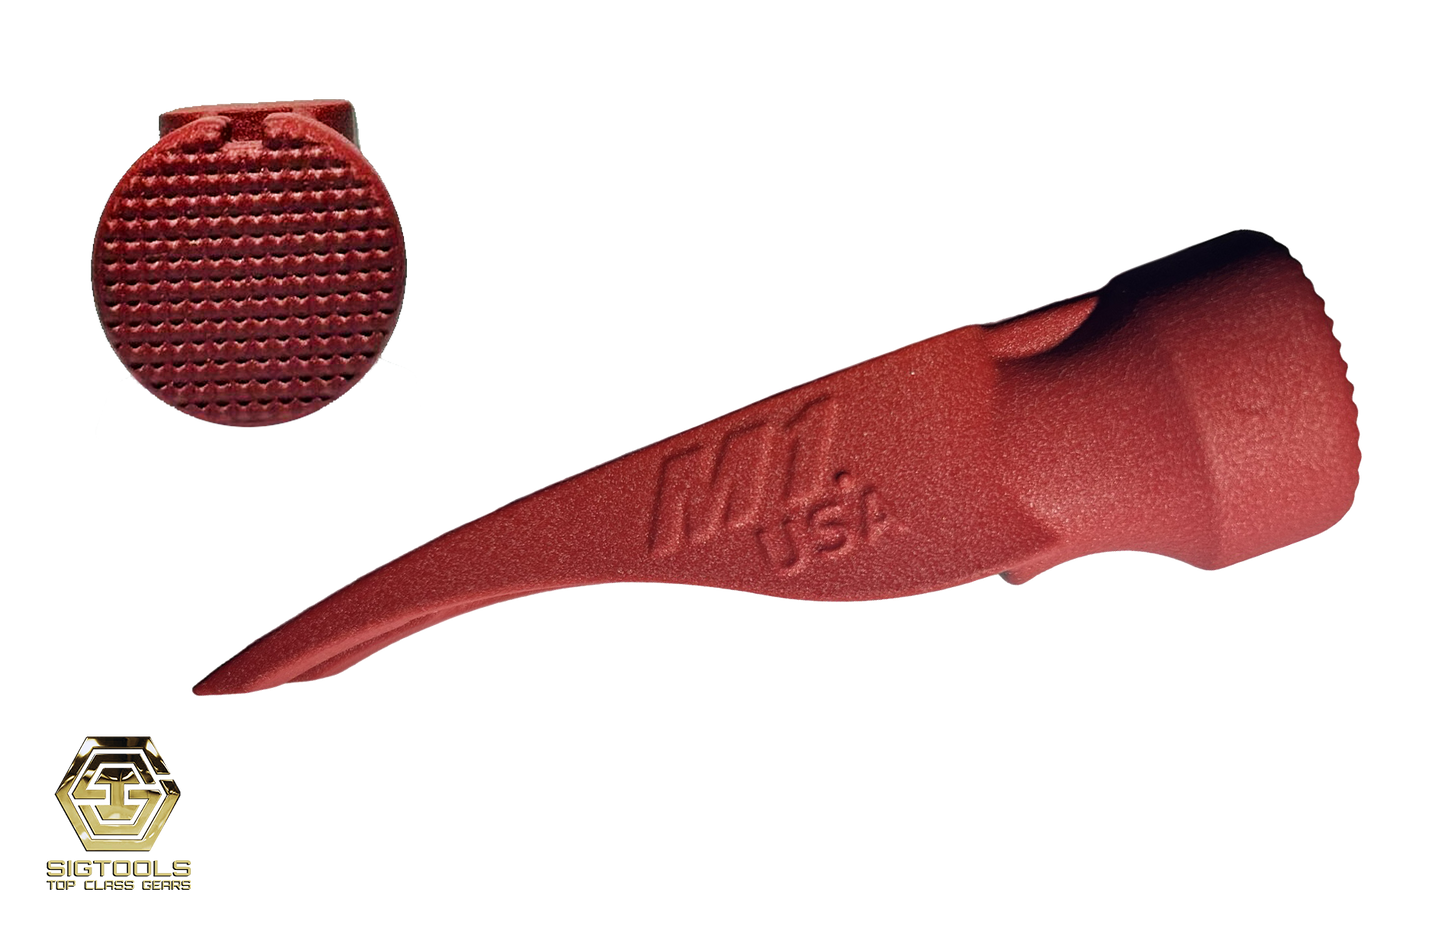 M1-15oz Martinez hammer head with Milled face and in colour Red, left Side view of the hammer head and showcase of the Milled face of the head